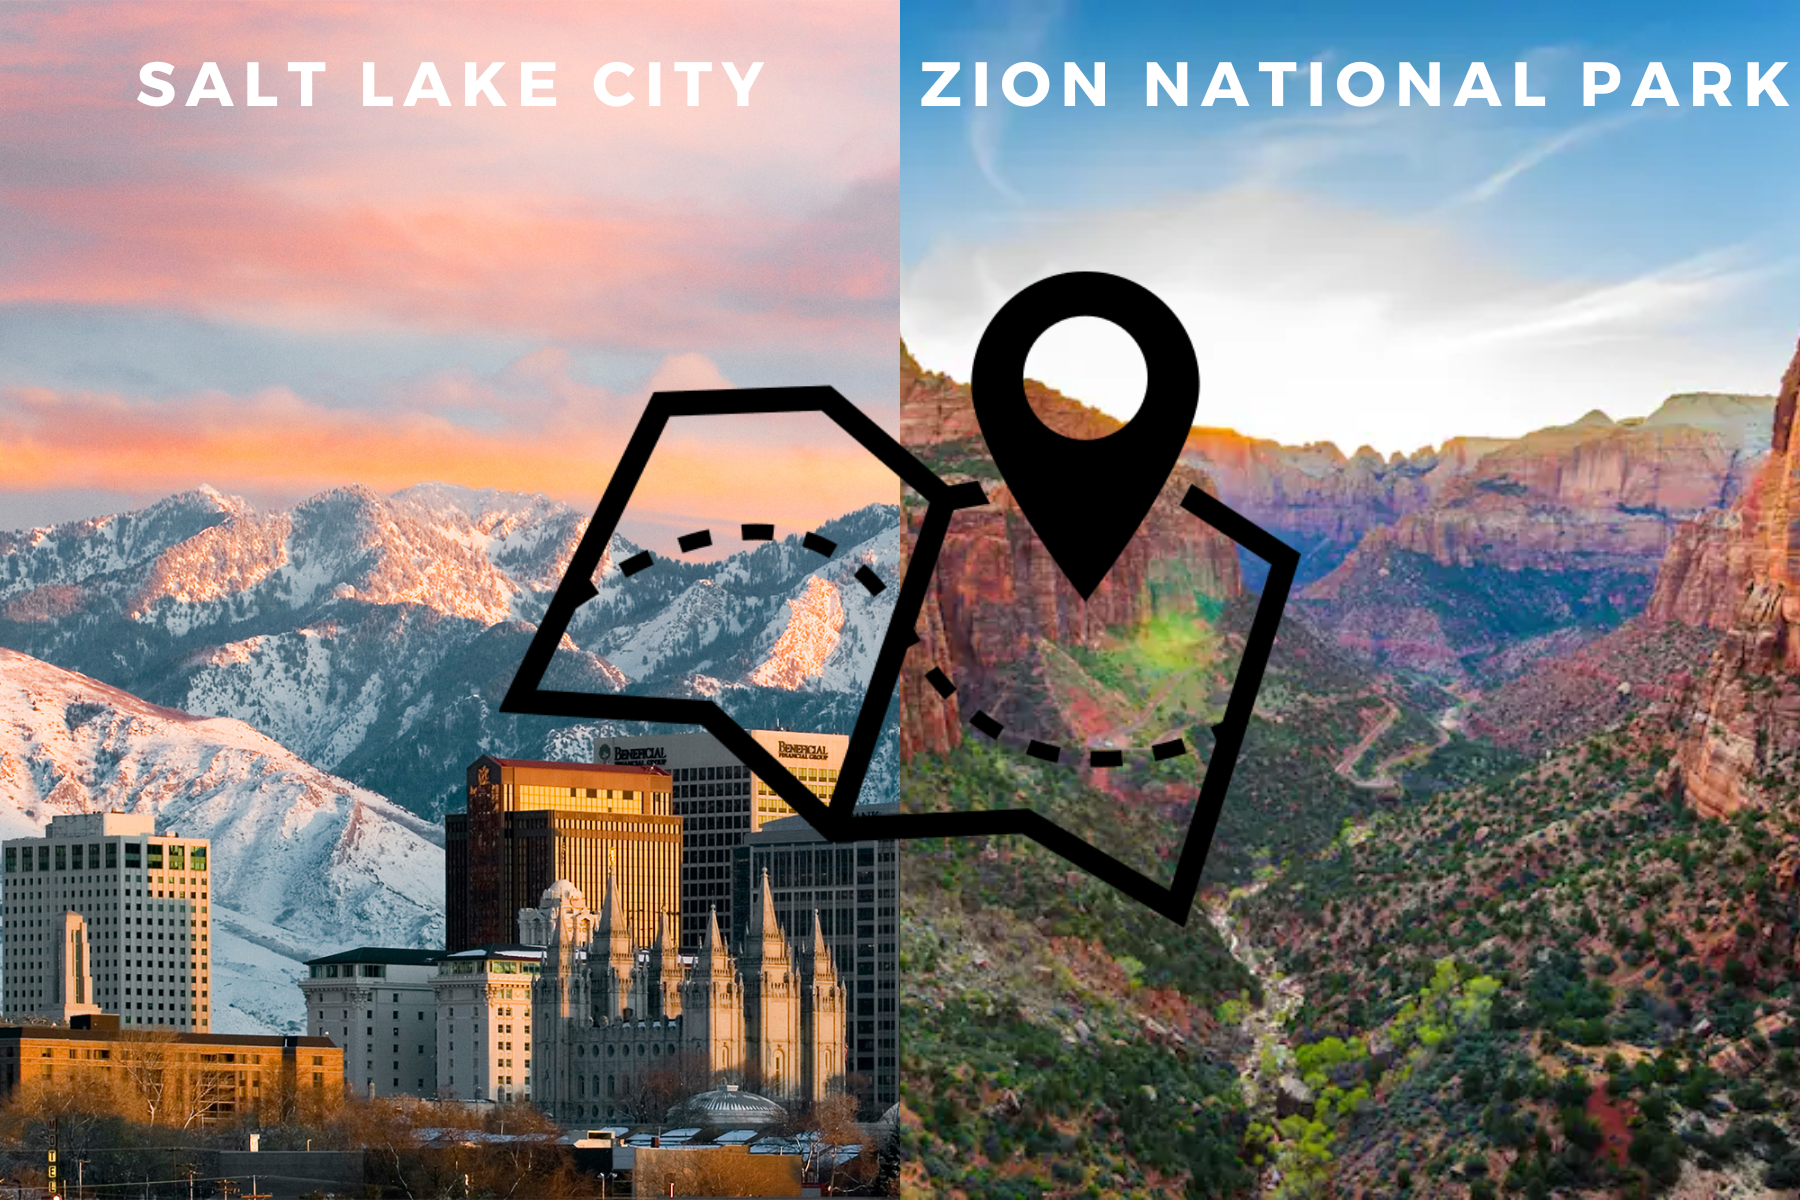 A photograph of Salt Lake City on the left and a photograph of Zion National Park on the right